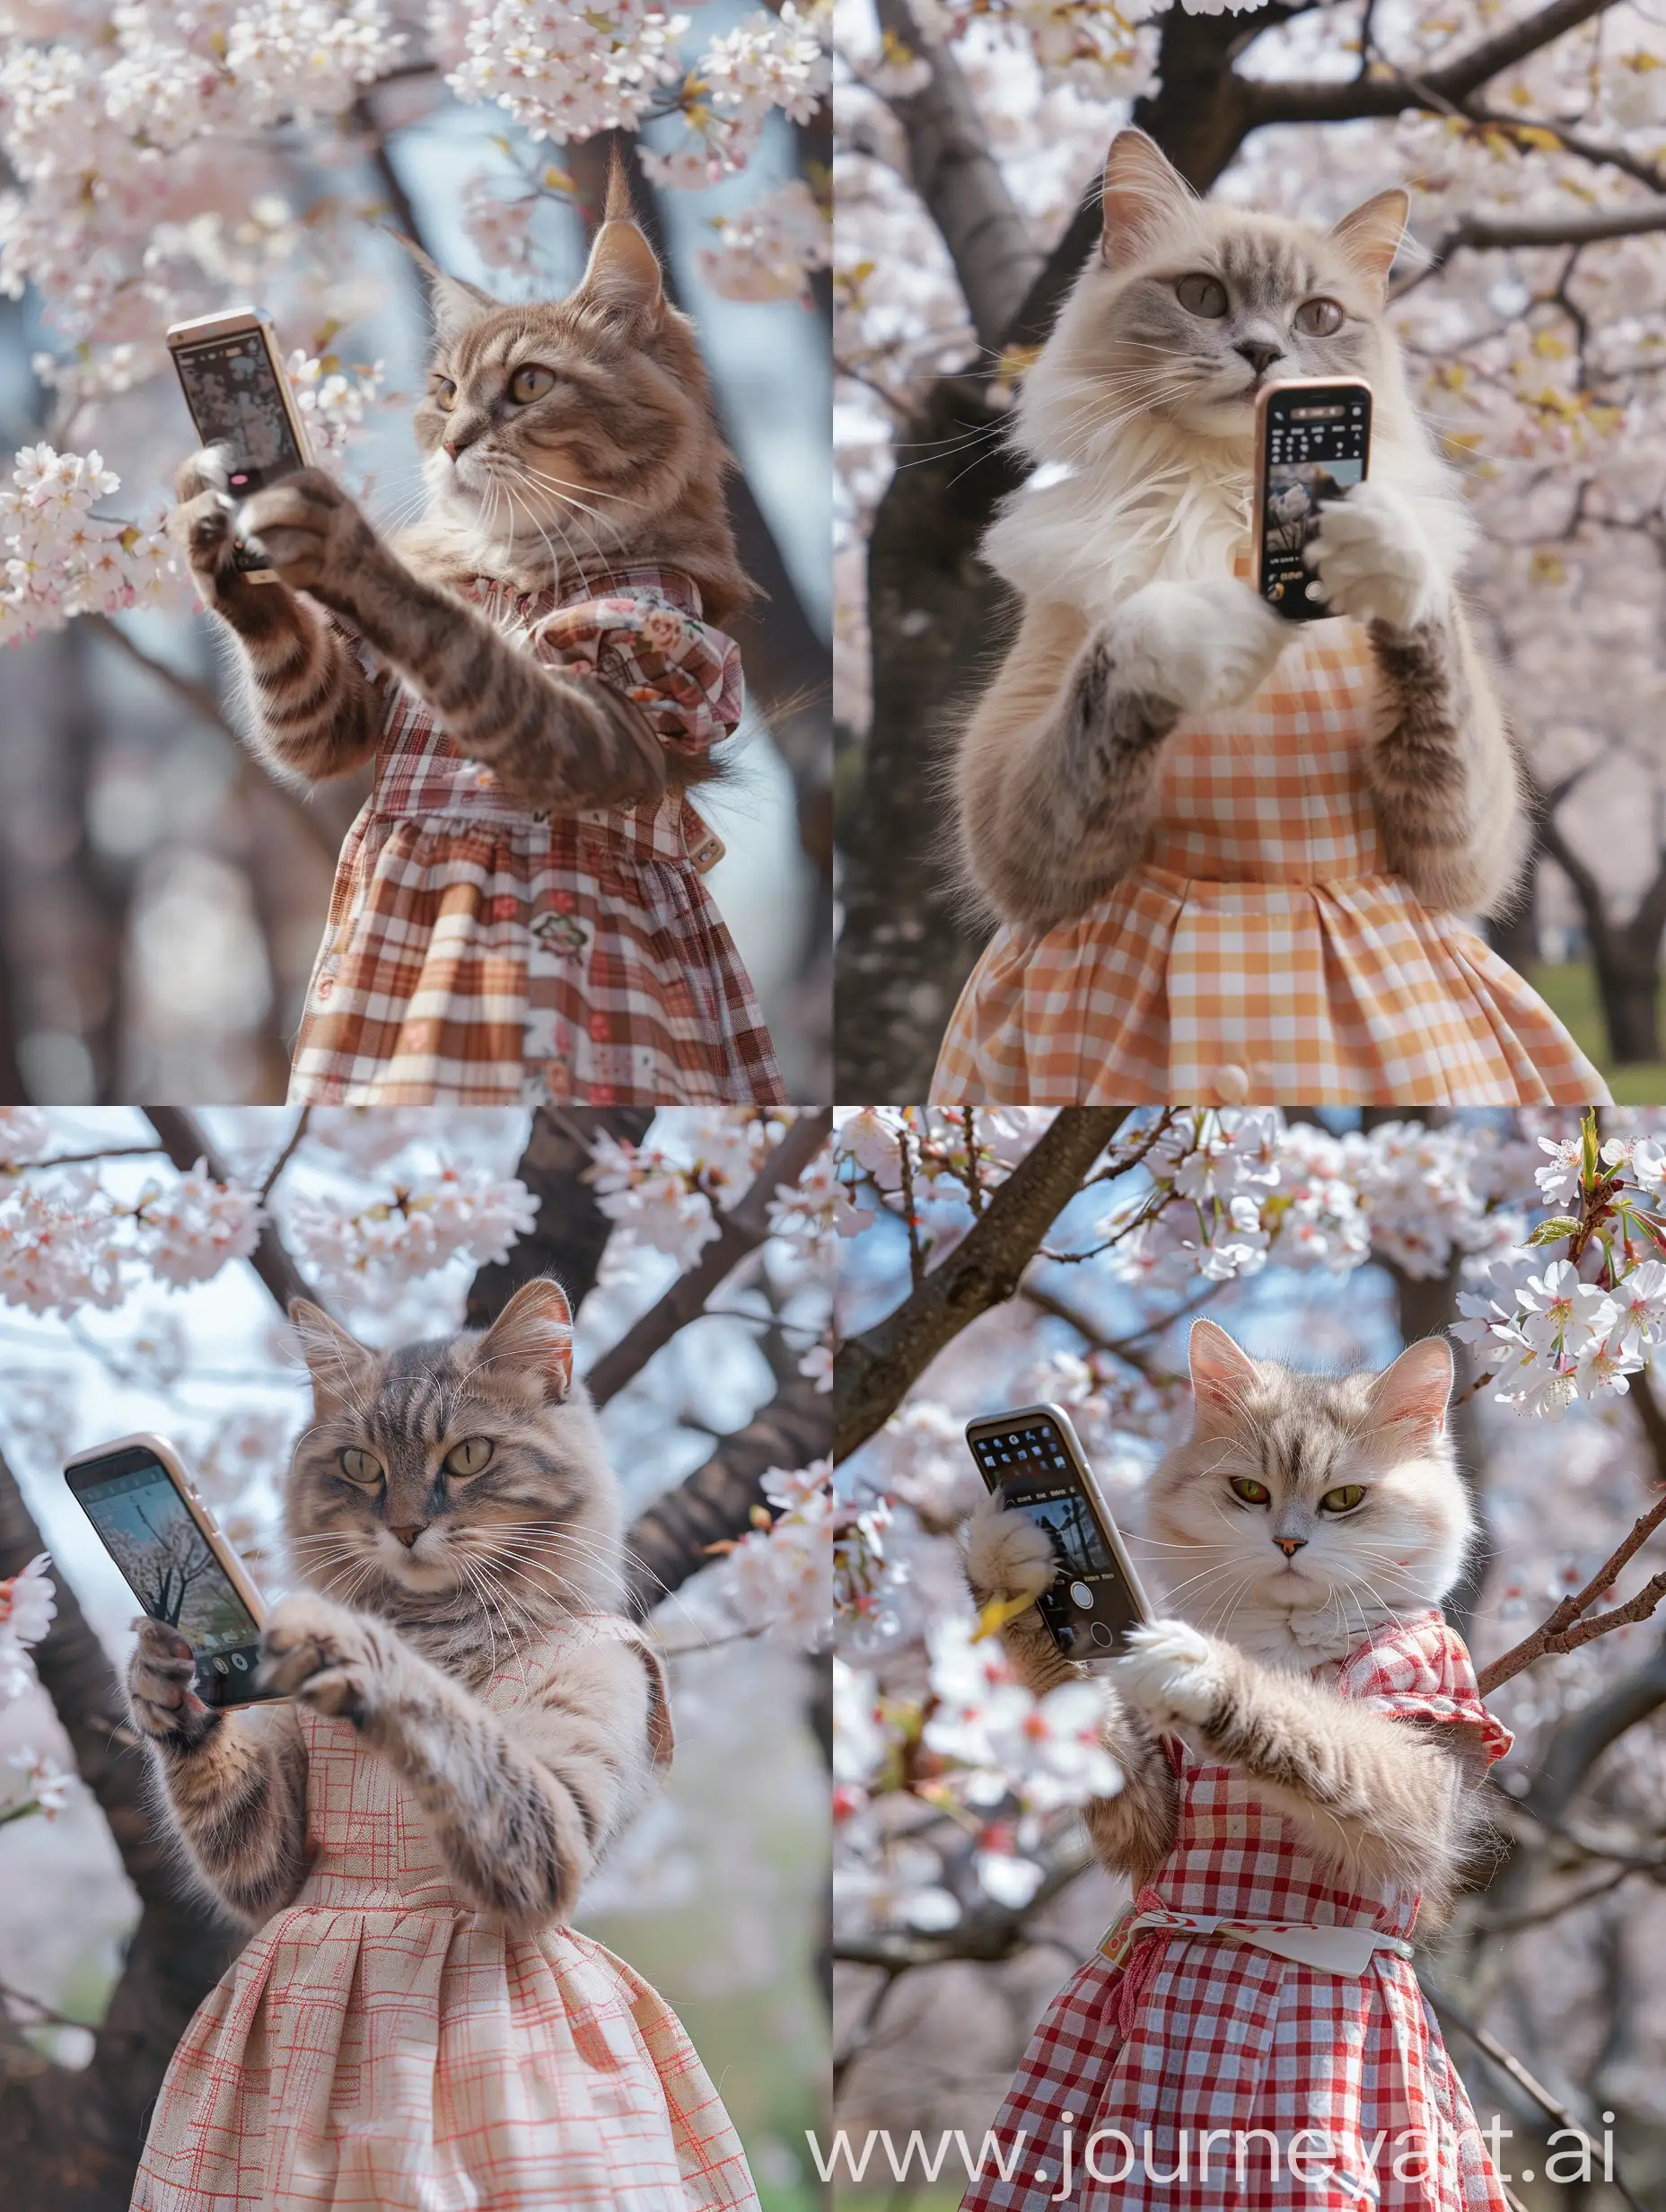 Chic-Cat-Photographer-Captures-Cherry-Blossom-Beauty-in-Floral-Attire